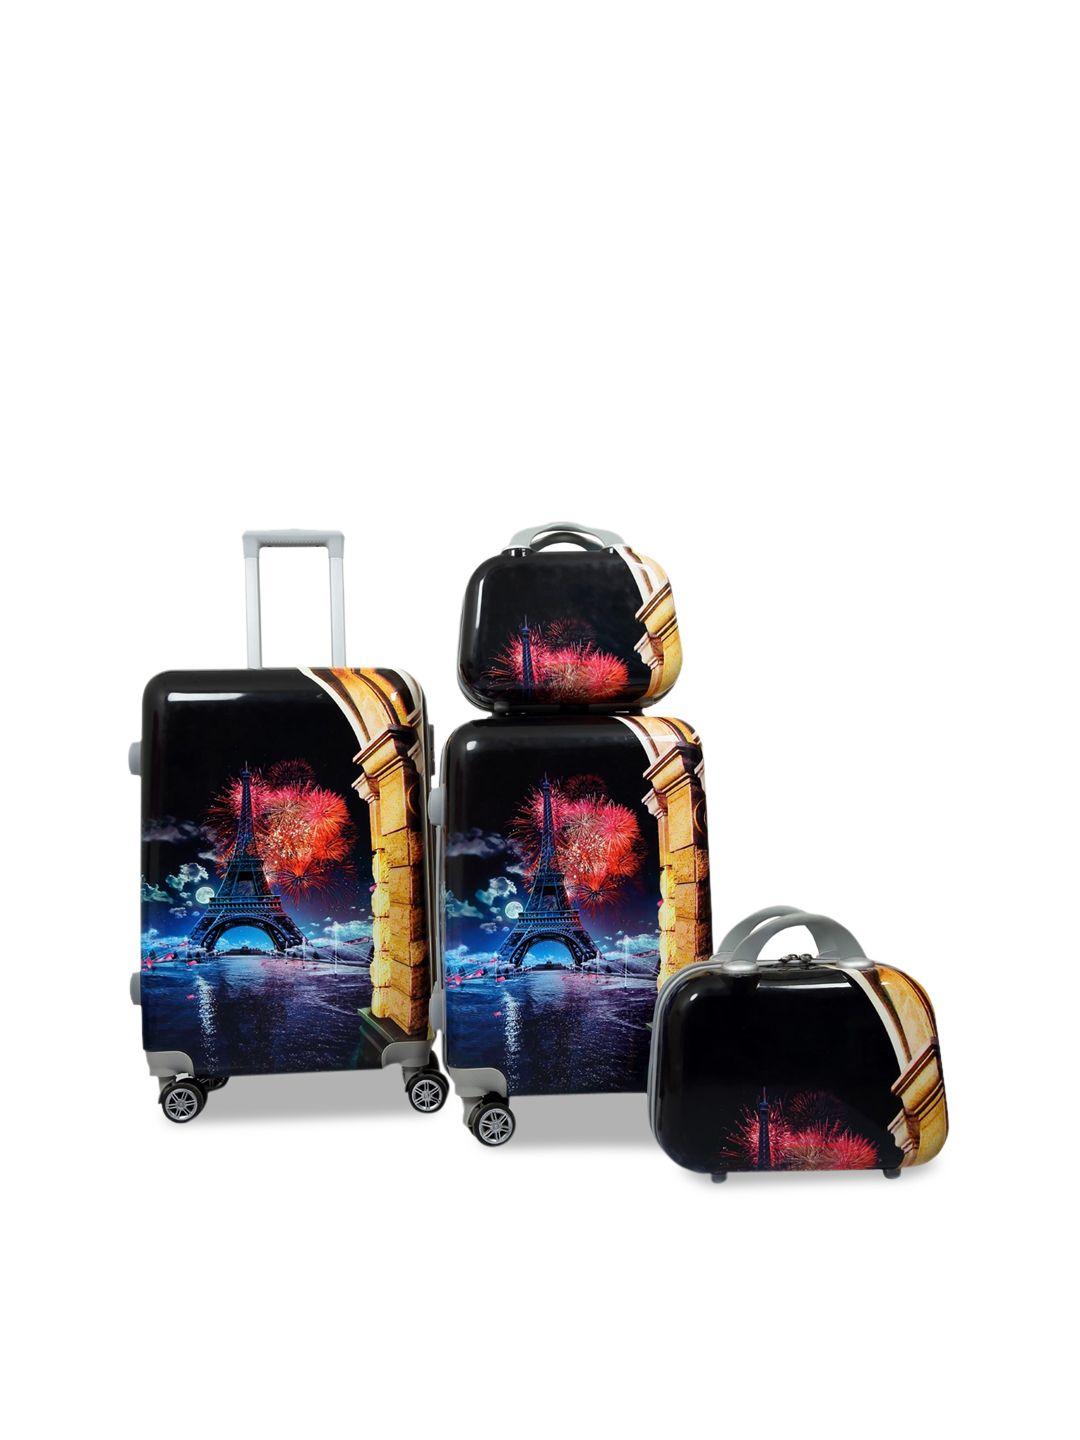 polo class set of 4 black hard-sided trolley suitcases & vanity bags